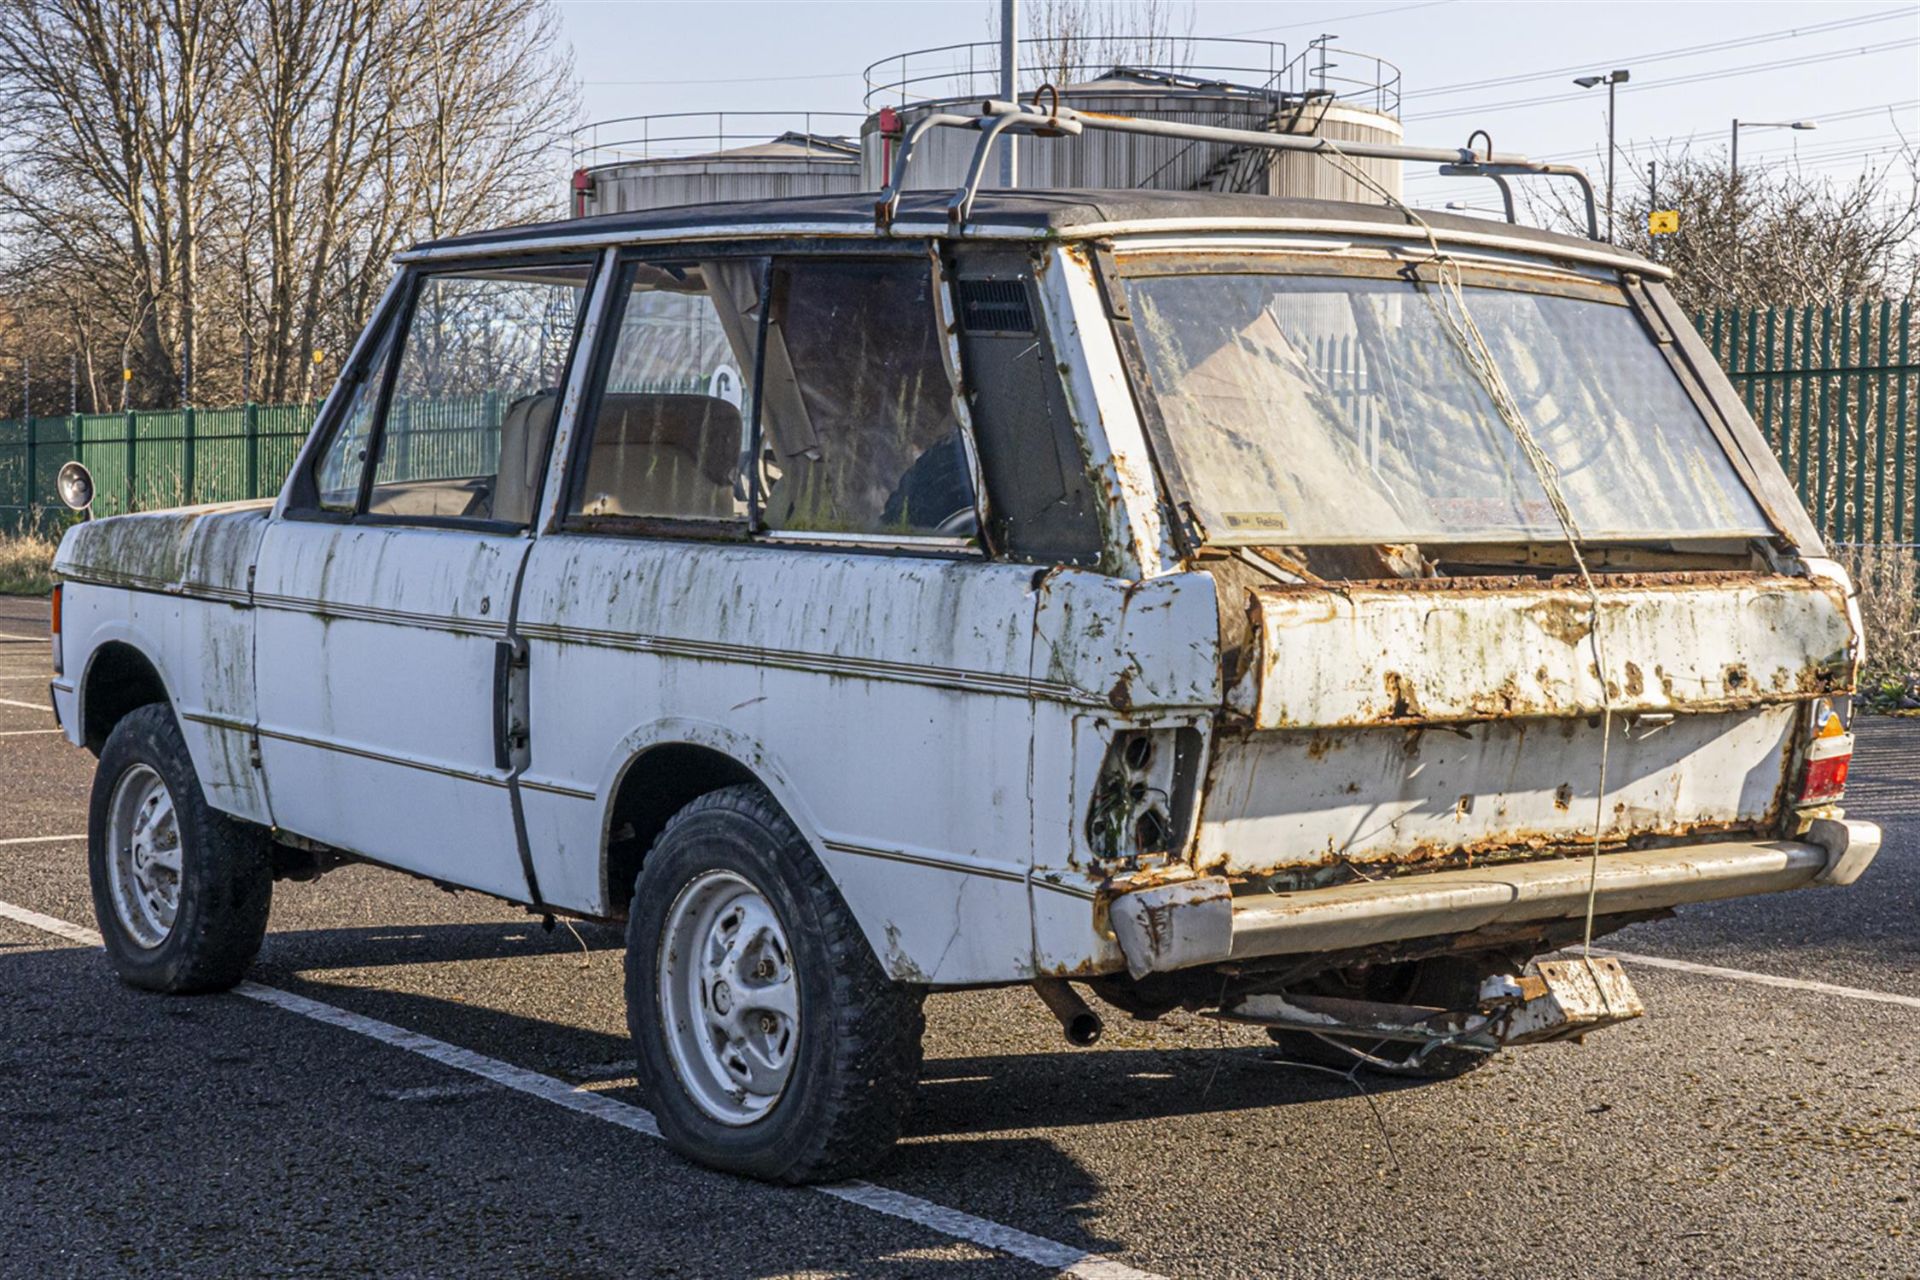 1971 Range Rover Classic 'Suffix A' - Image 4 of 5